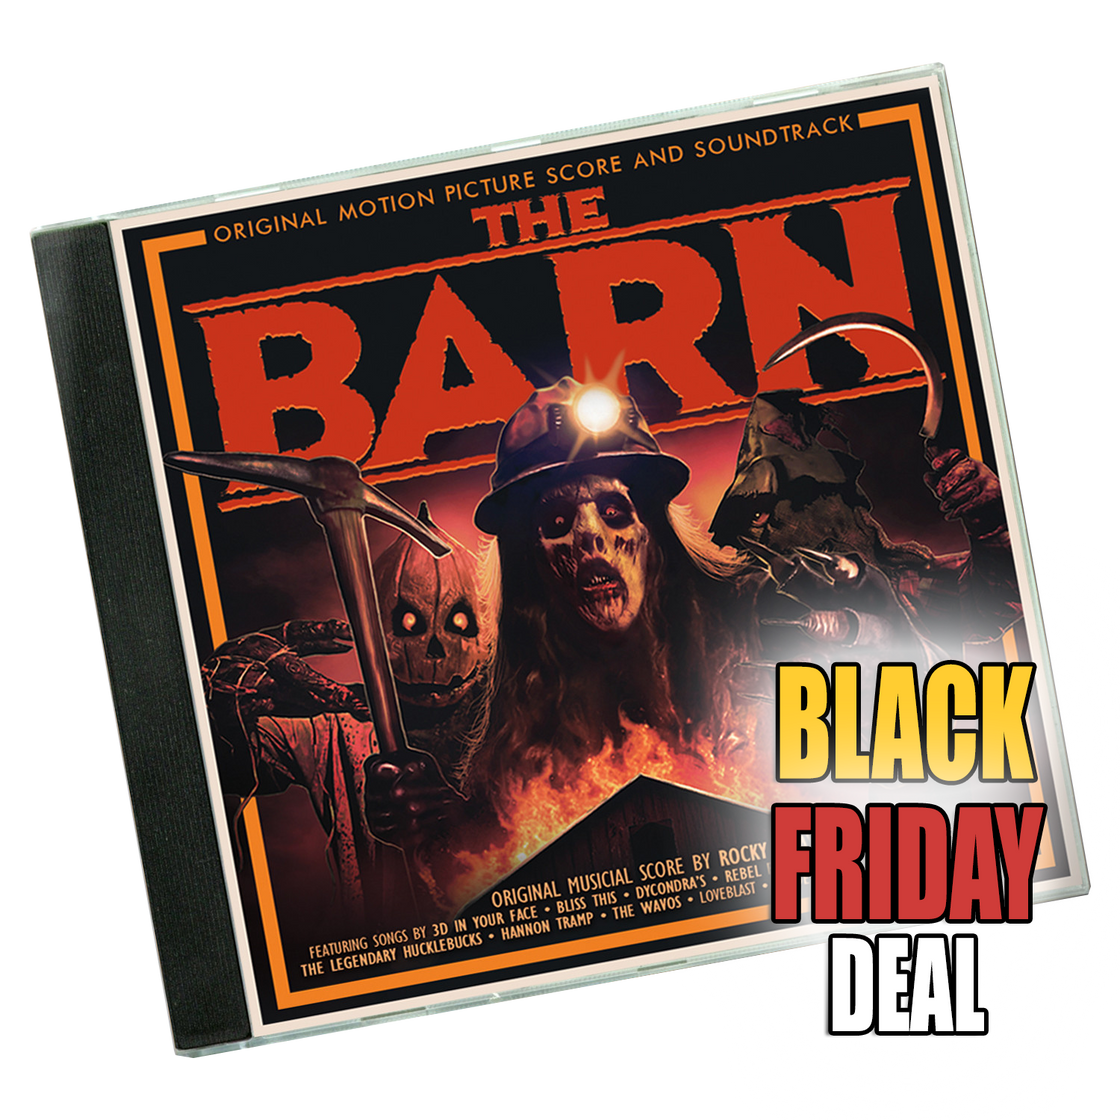 BLACK FRIDAY The Barn - Soundtrack - CD (2 Disc) Score and Various Artists